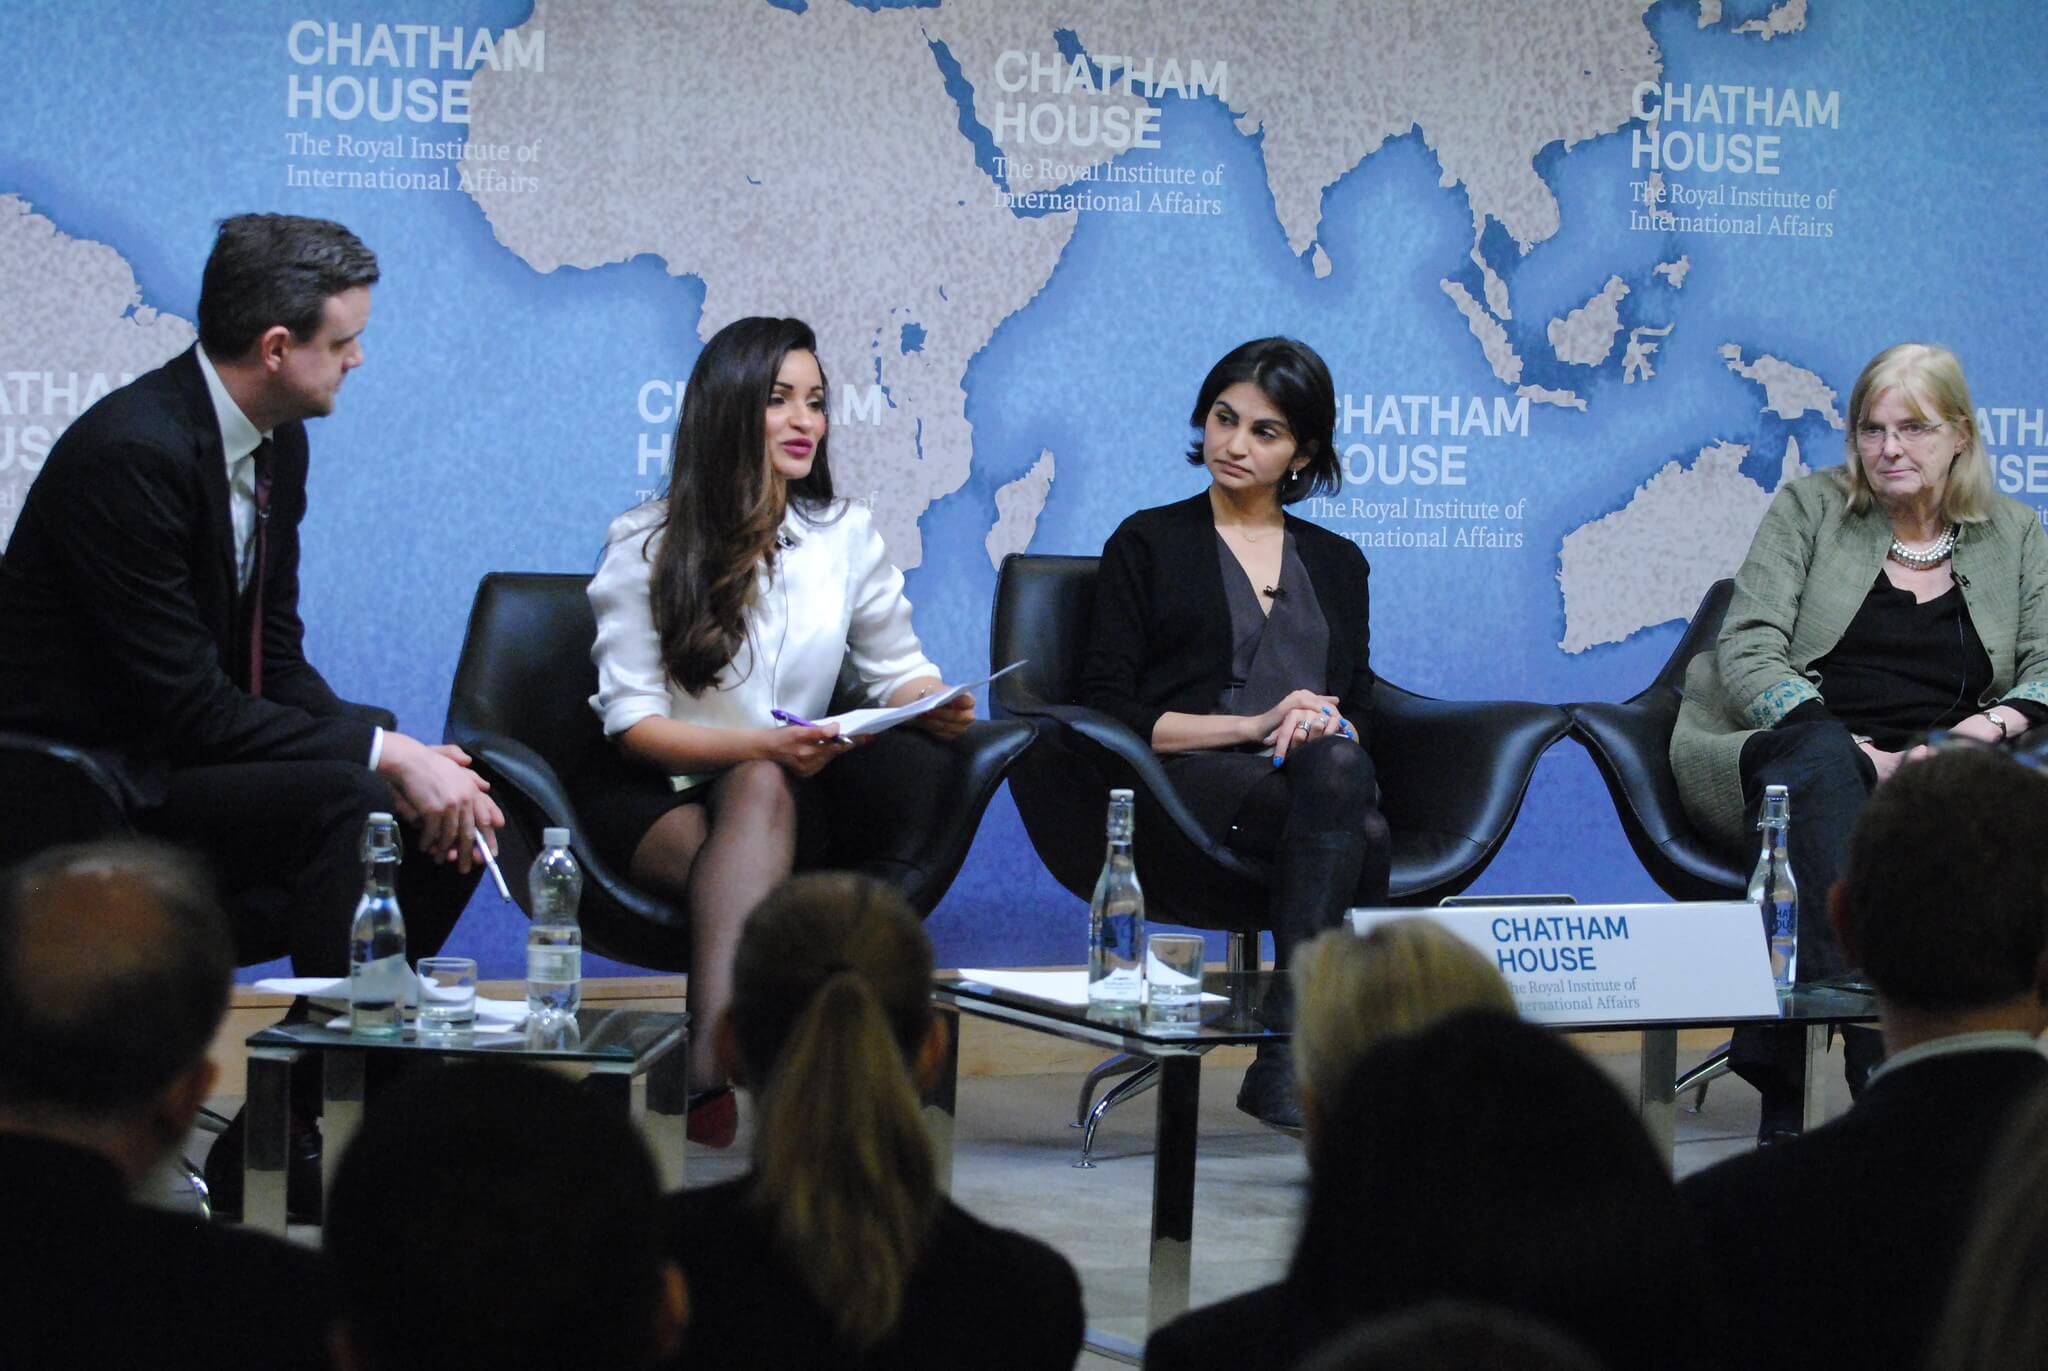 Bijeenkomst 'The Future for Women in Saudi Arabia' in 2017 in Chatham House, Londen. © Chatham House / Flickr